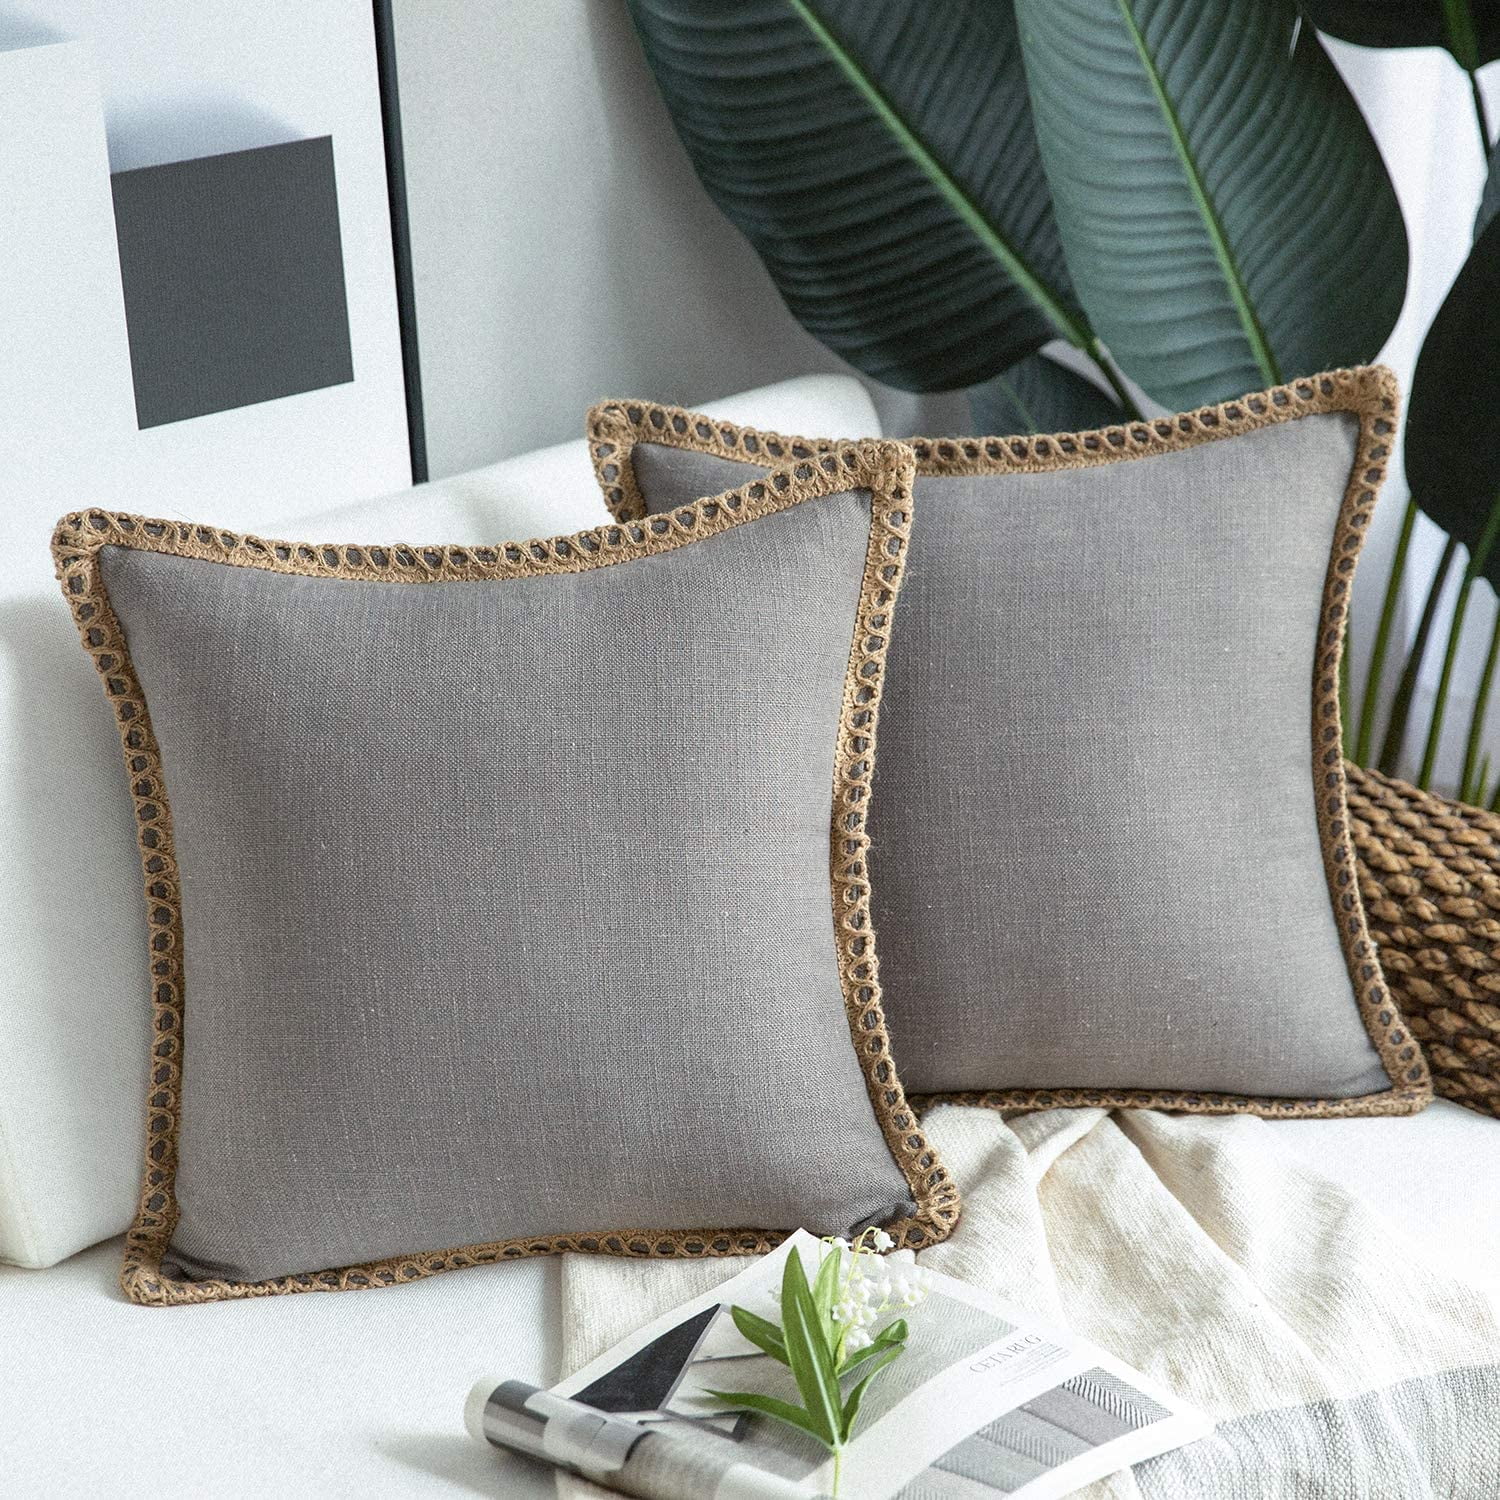 Caflife Throw Pillow Covers 20x20 for Boho Bed Couch, 2 Pack Elegant Home  Decorative Off White with Tassels Linen Burlap Throw Pillows for Farmhouse